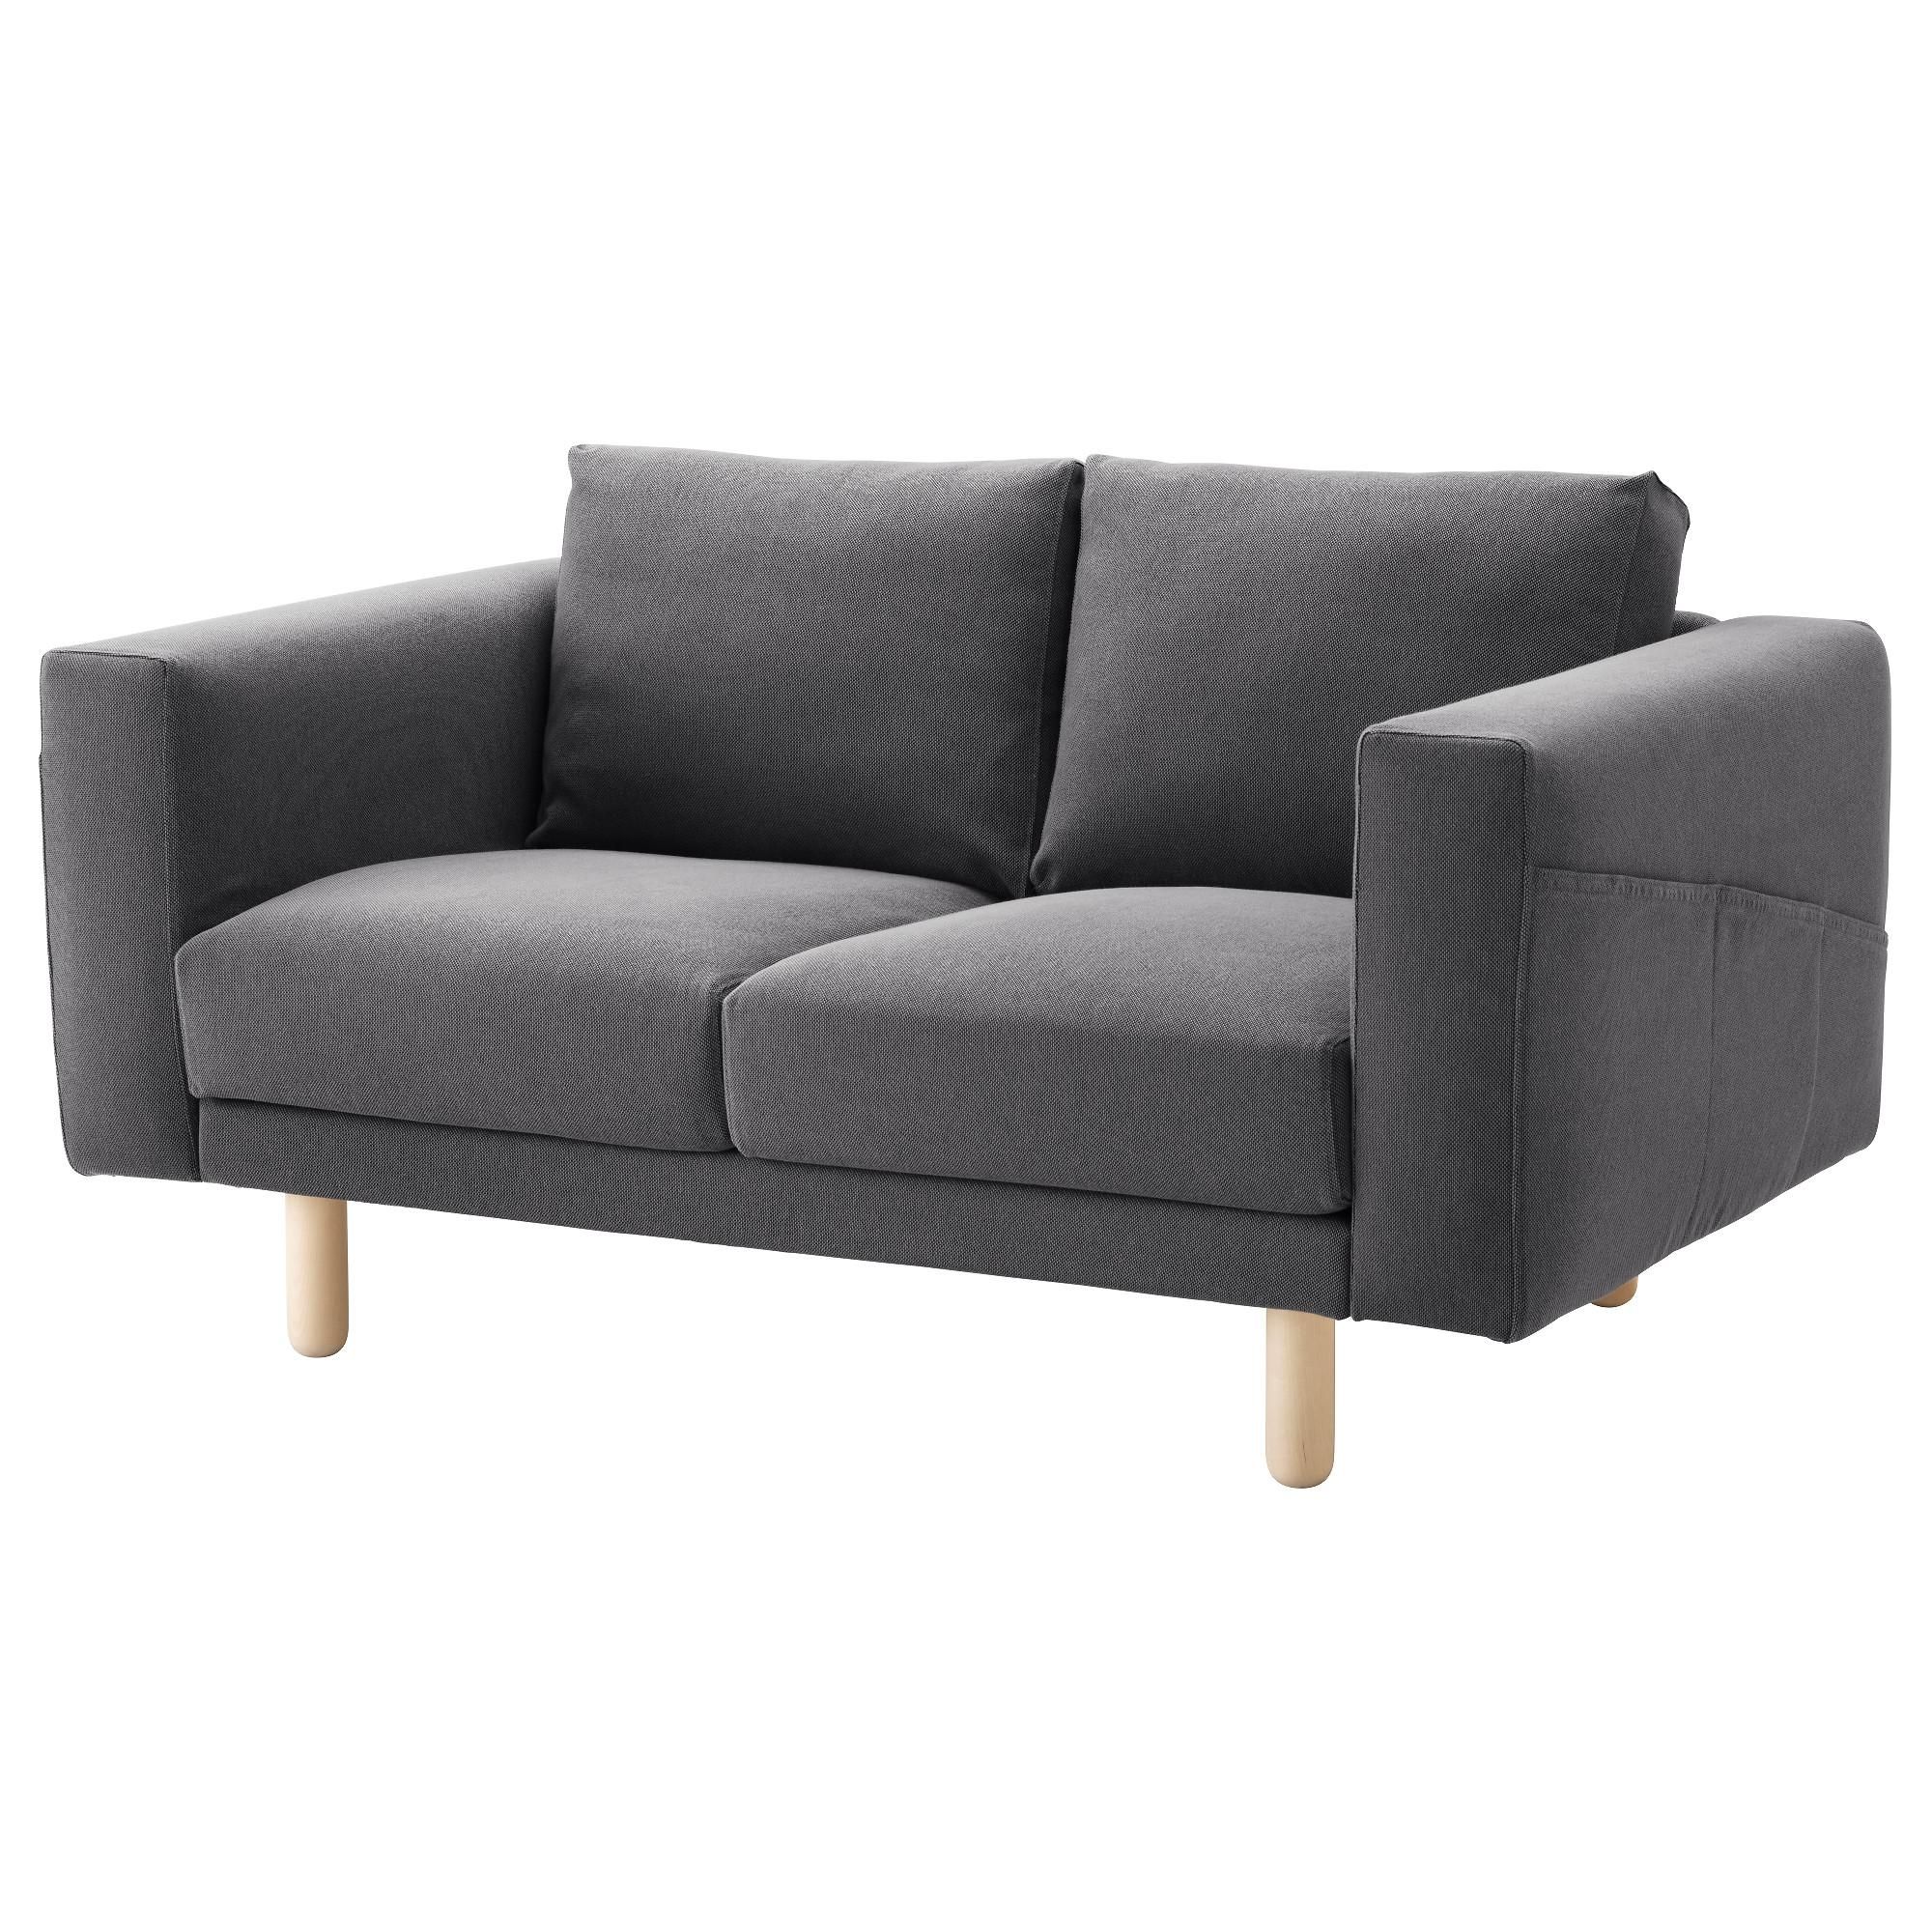 Sofas : Magnificent 2 Seater Chaise Sofa 2 Seater Corner Sofa Bed Inside 2x2 Corner Sofas (View 18 of 21)